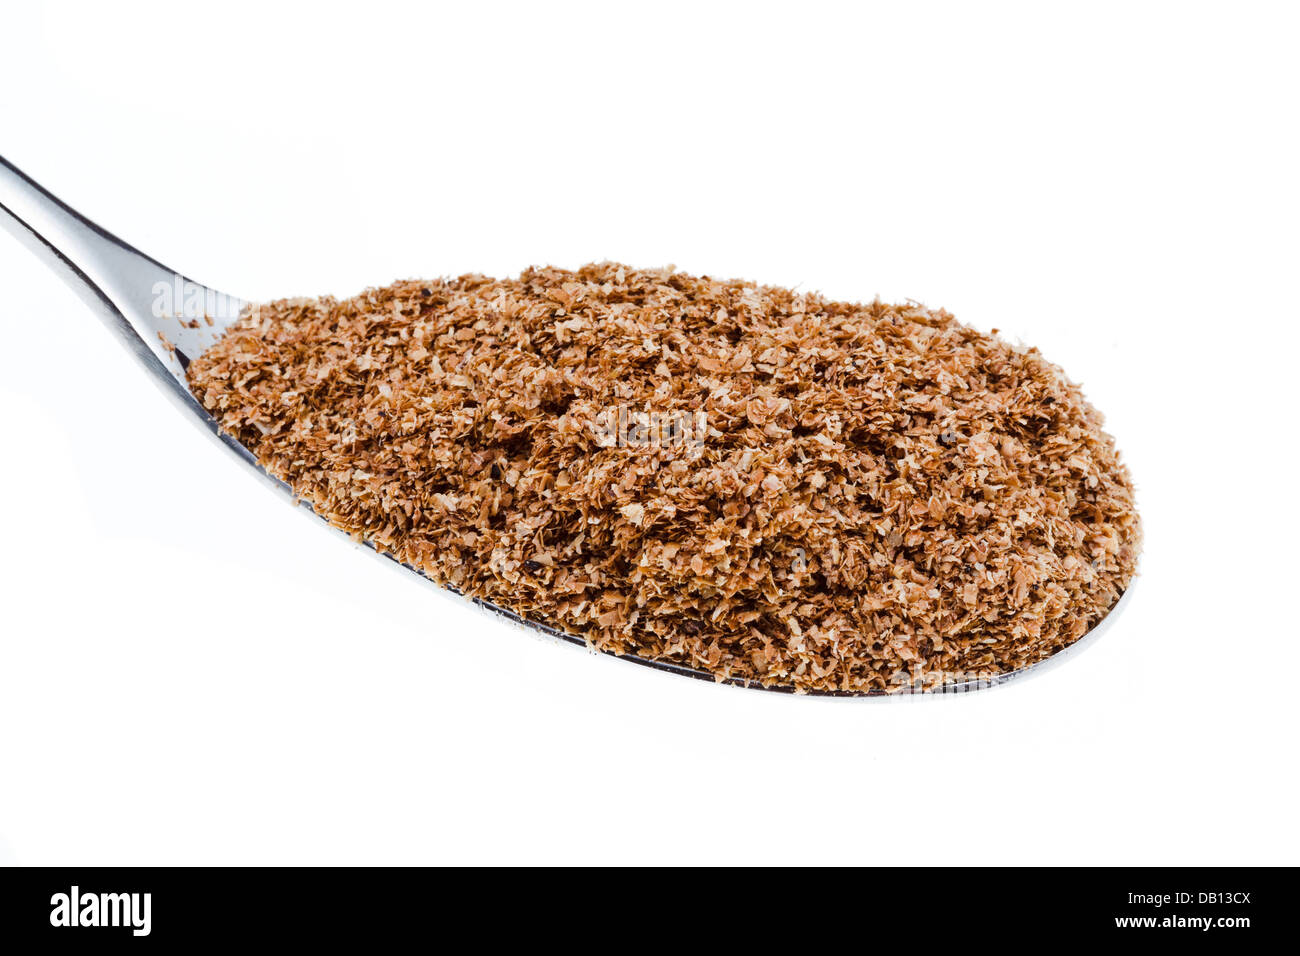 tablespoon of wheat bran close up isolated on white background Stock Photo